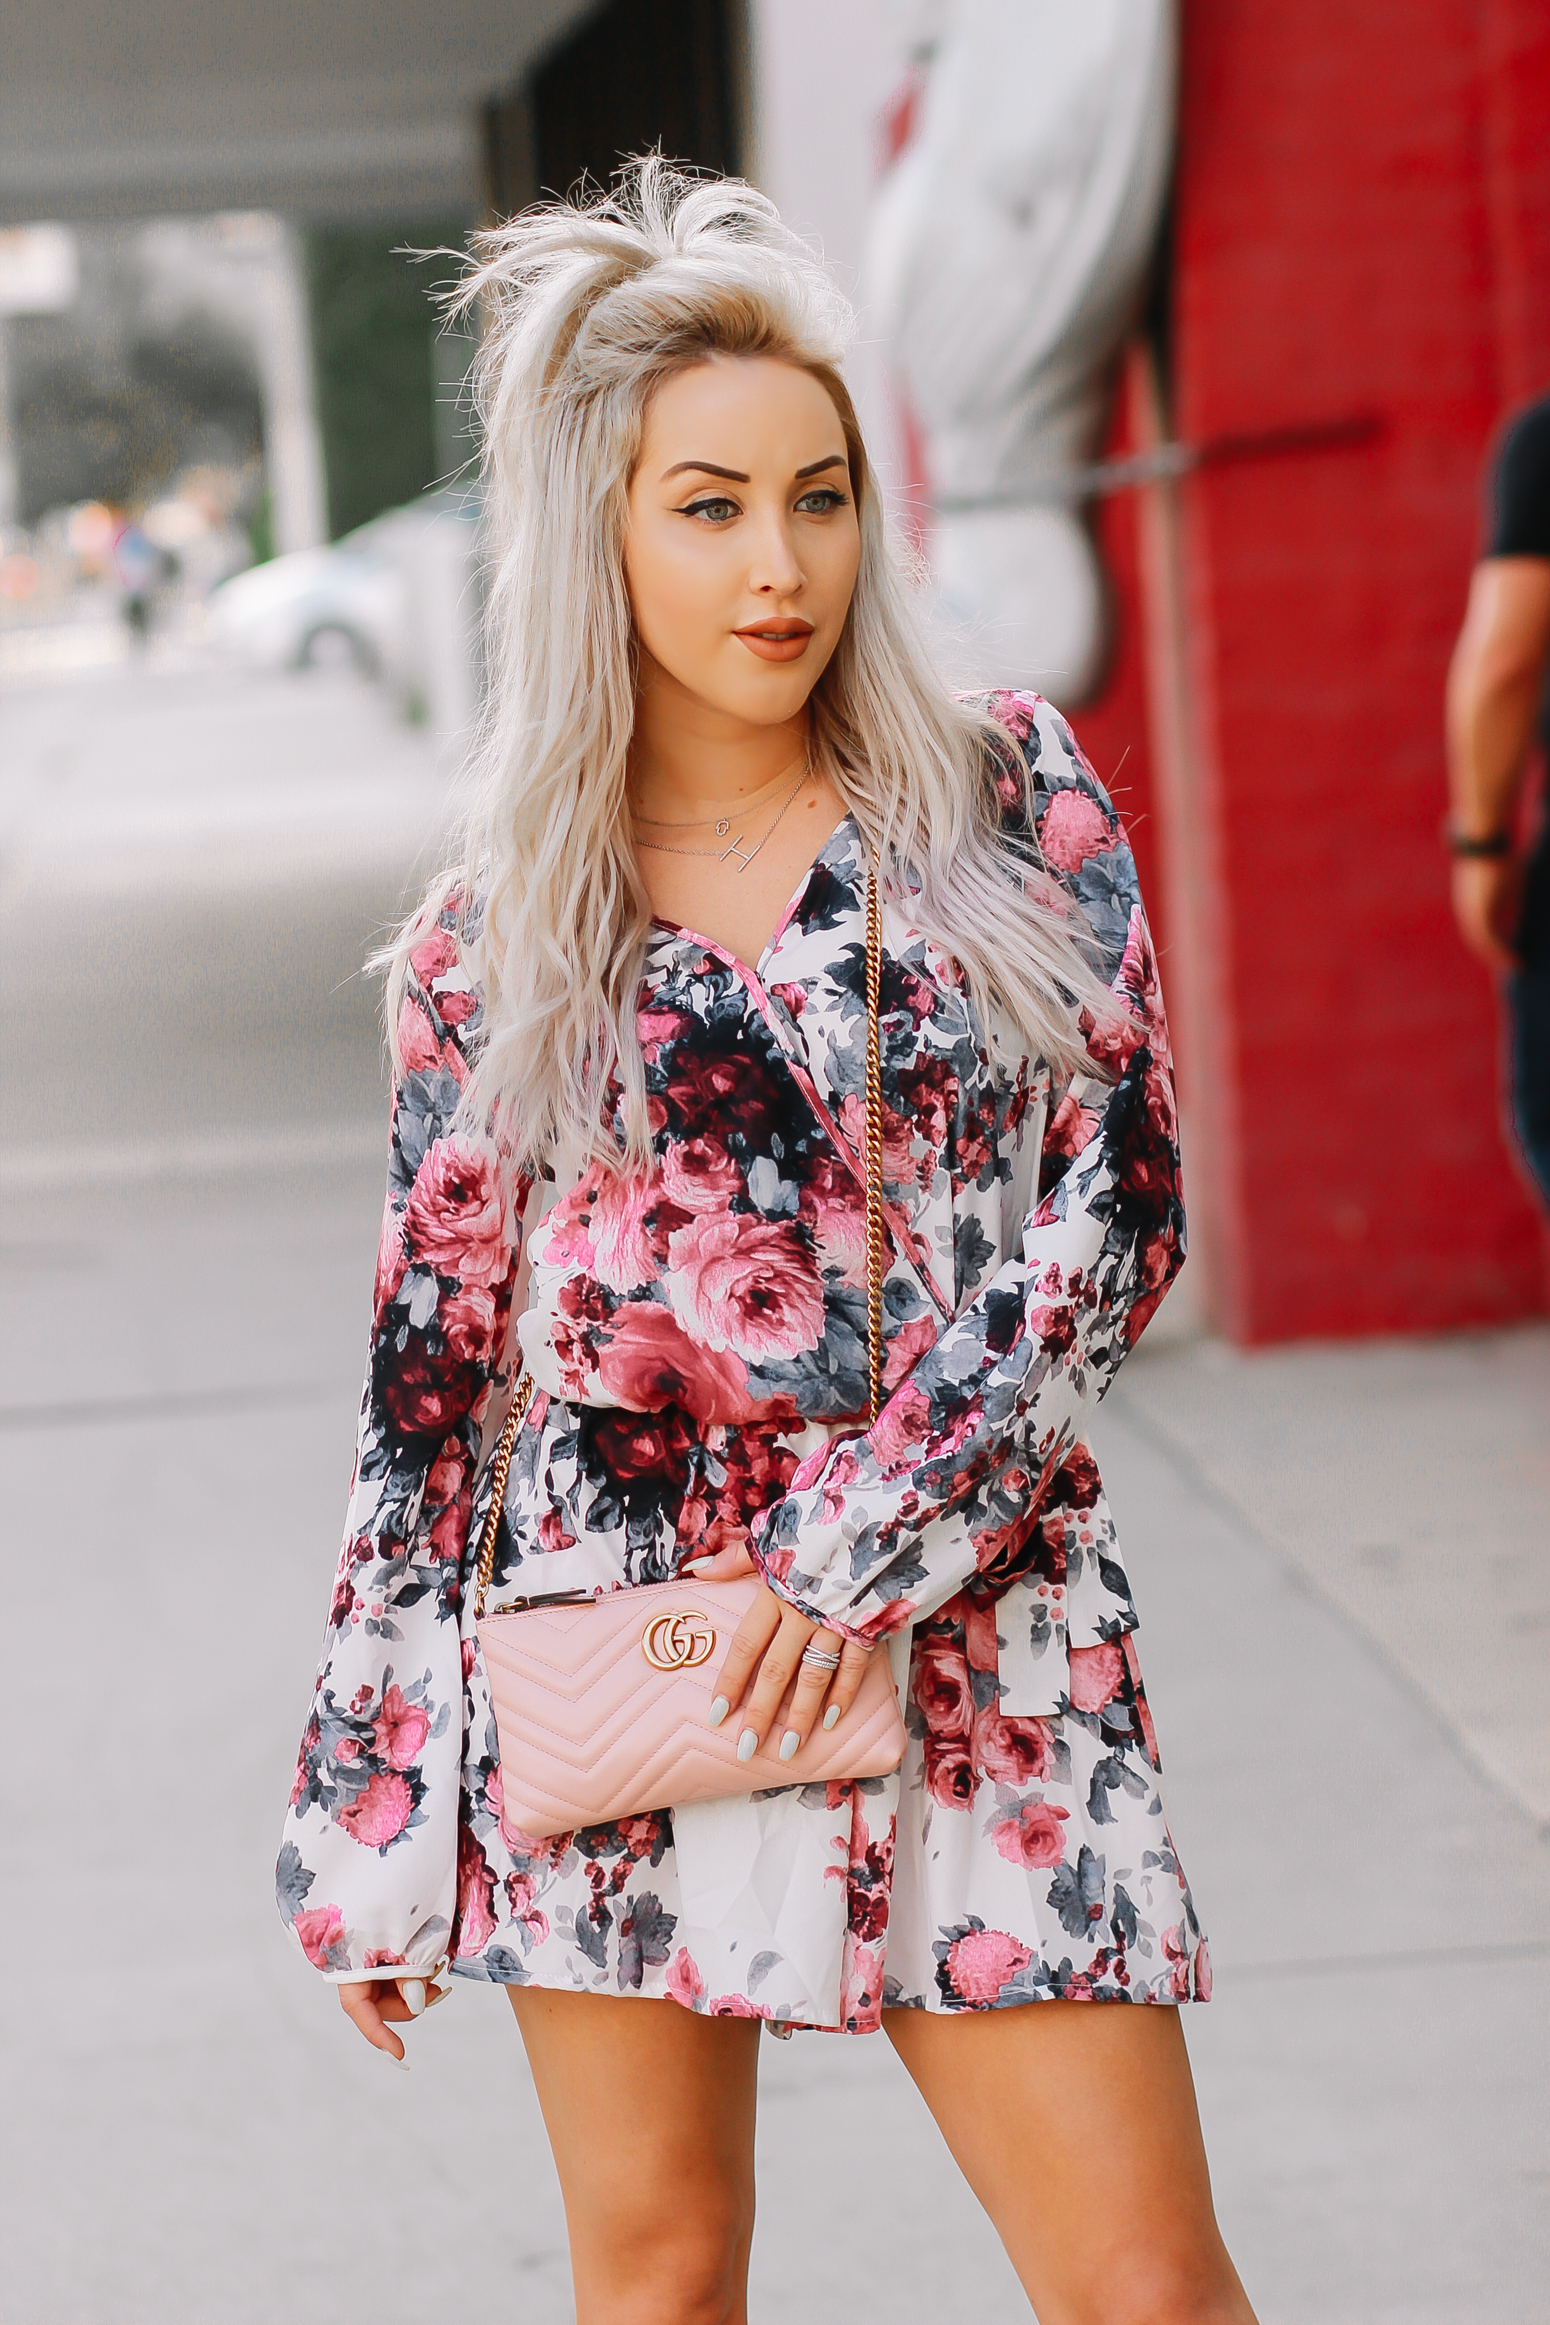 Blondie in the City | Pink Floral Summer Romper | Pink Gucci Bag